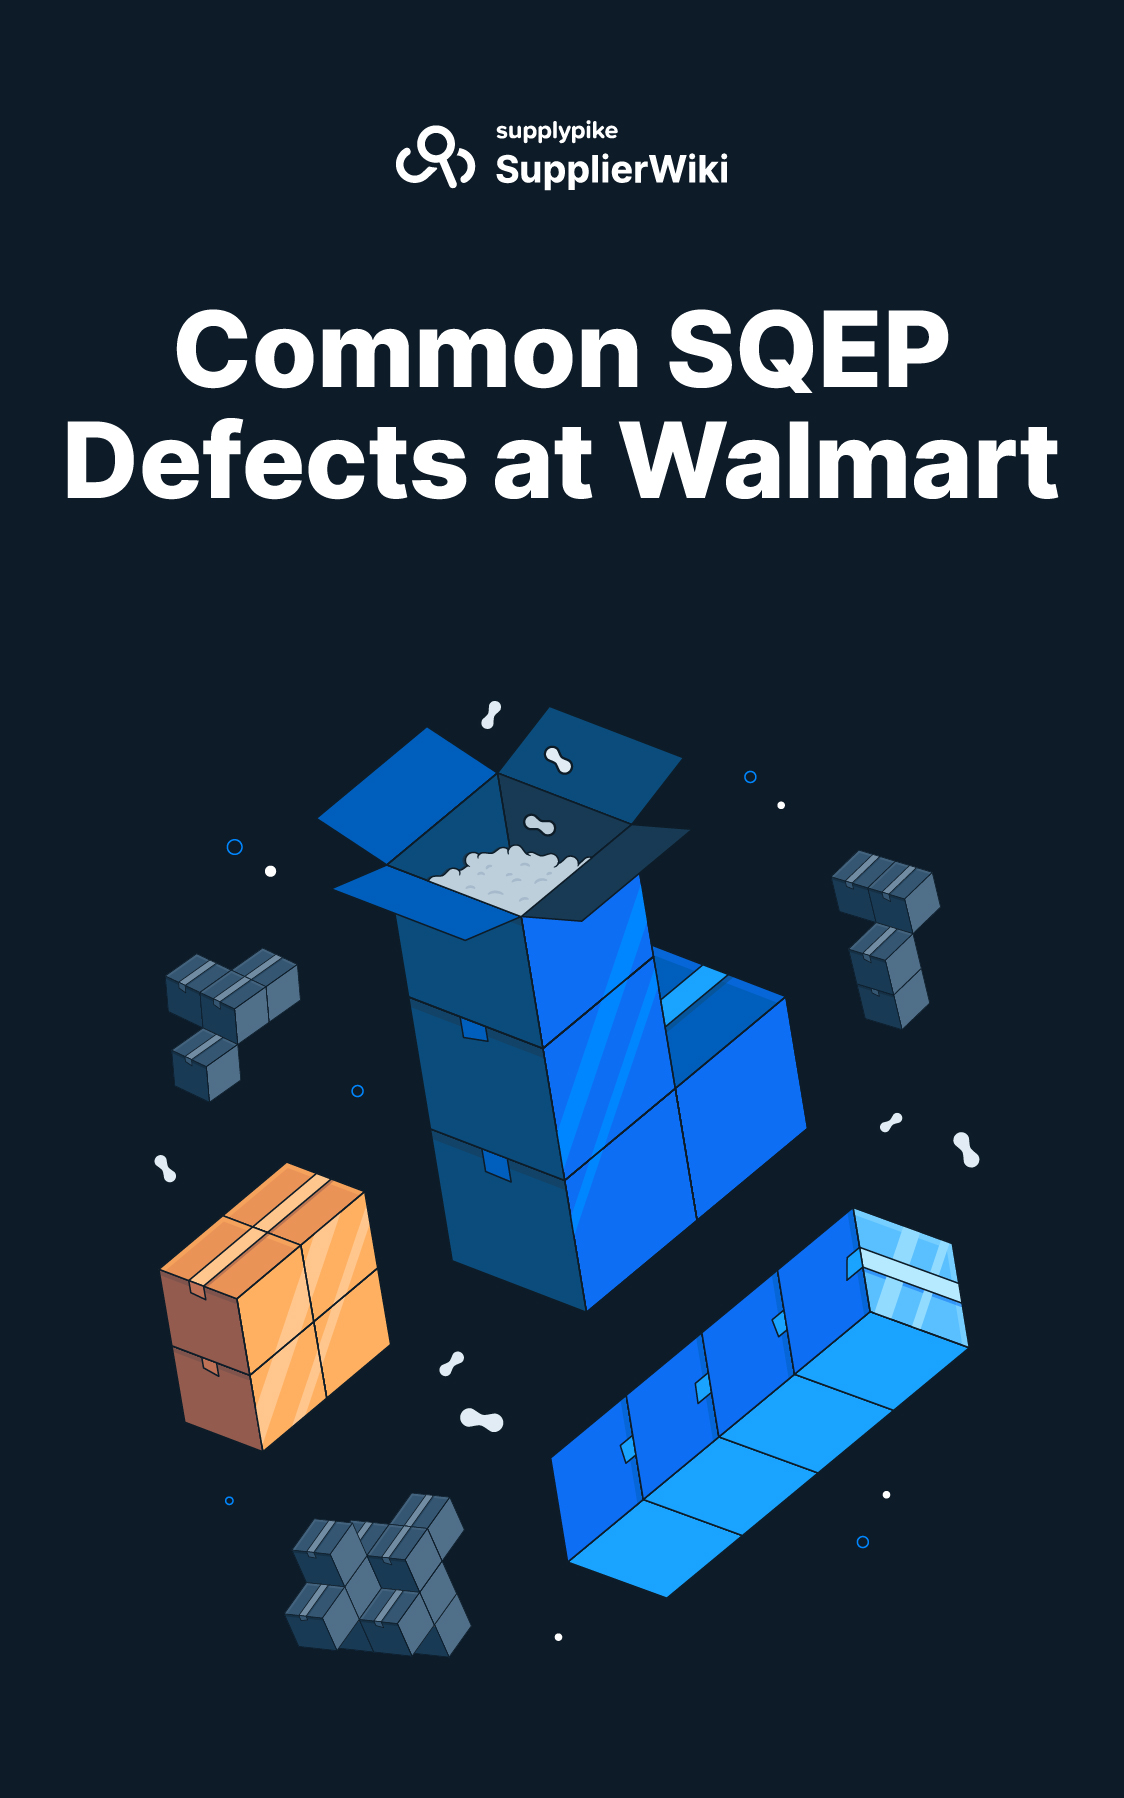 Common SQEP Defects at Walmart